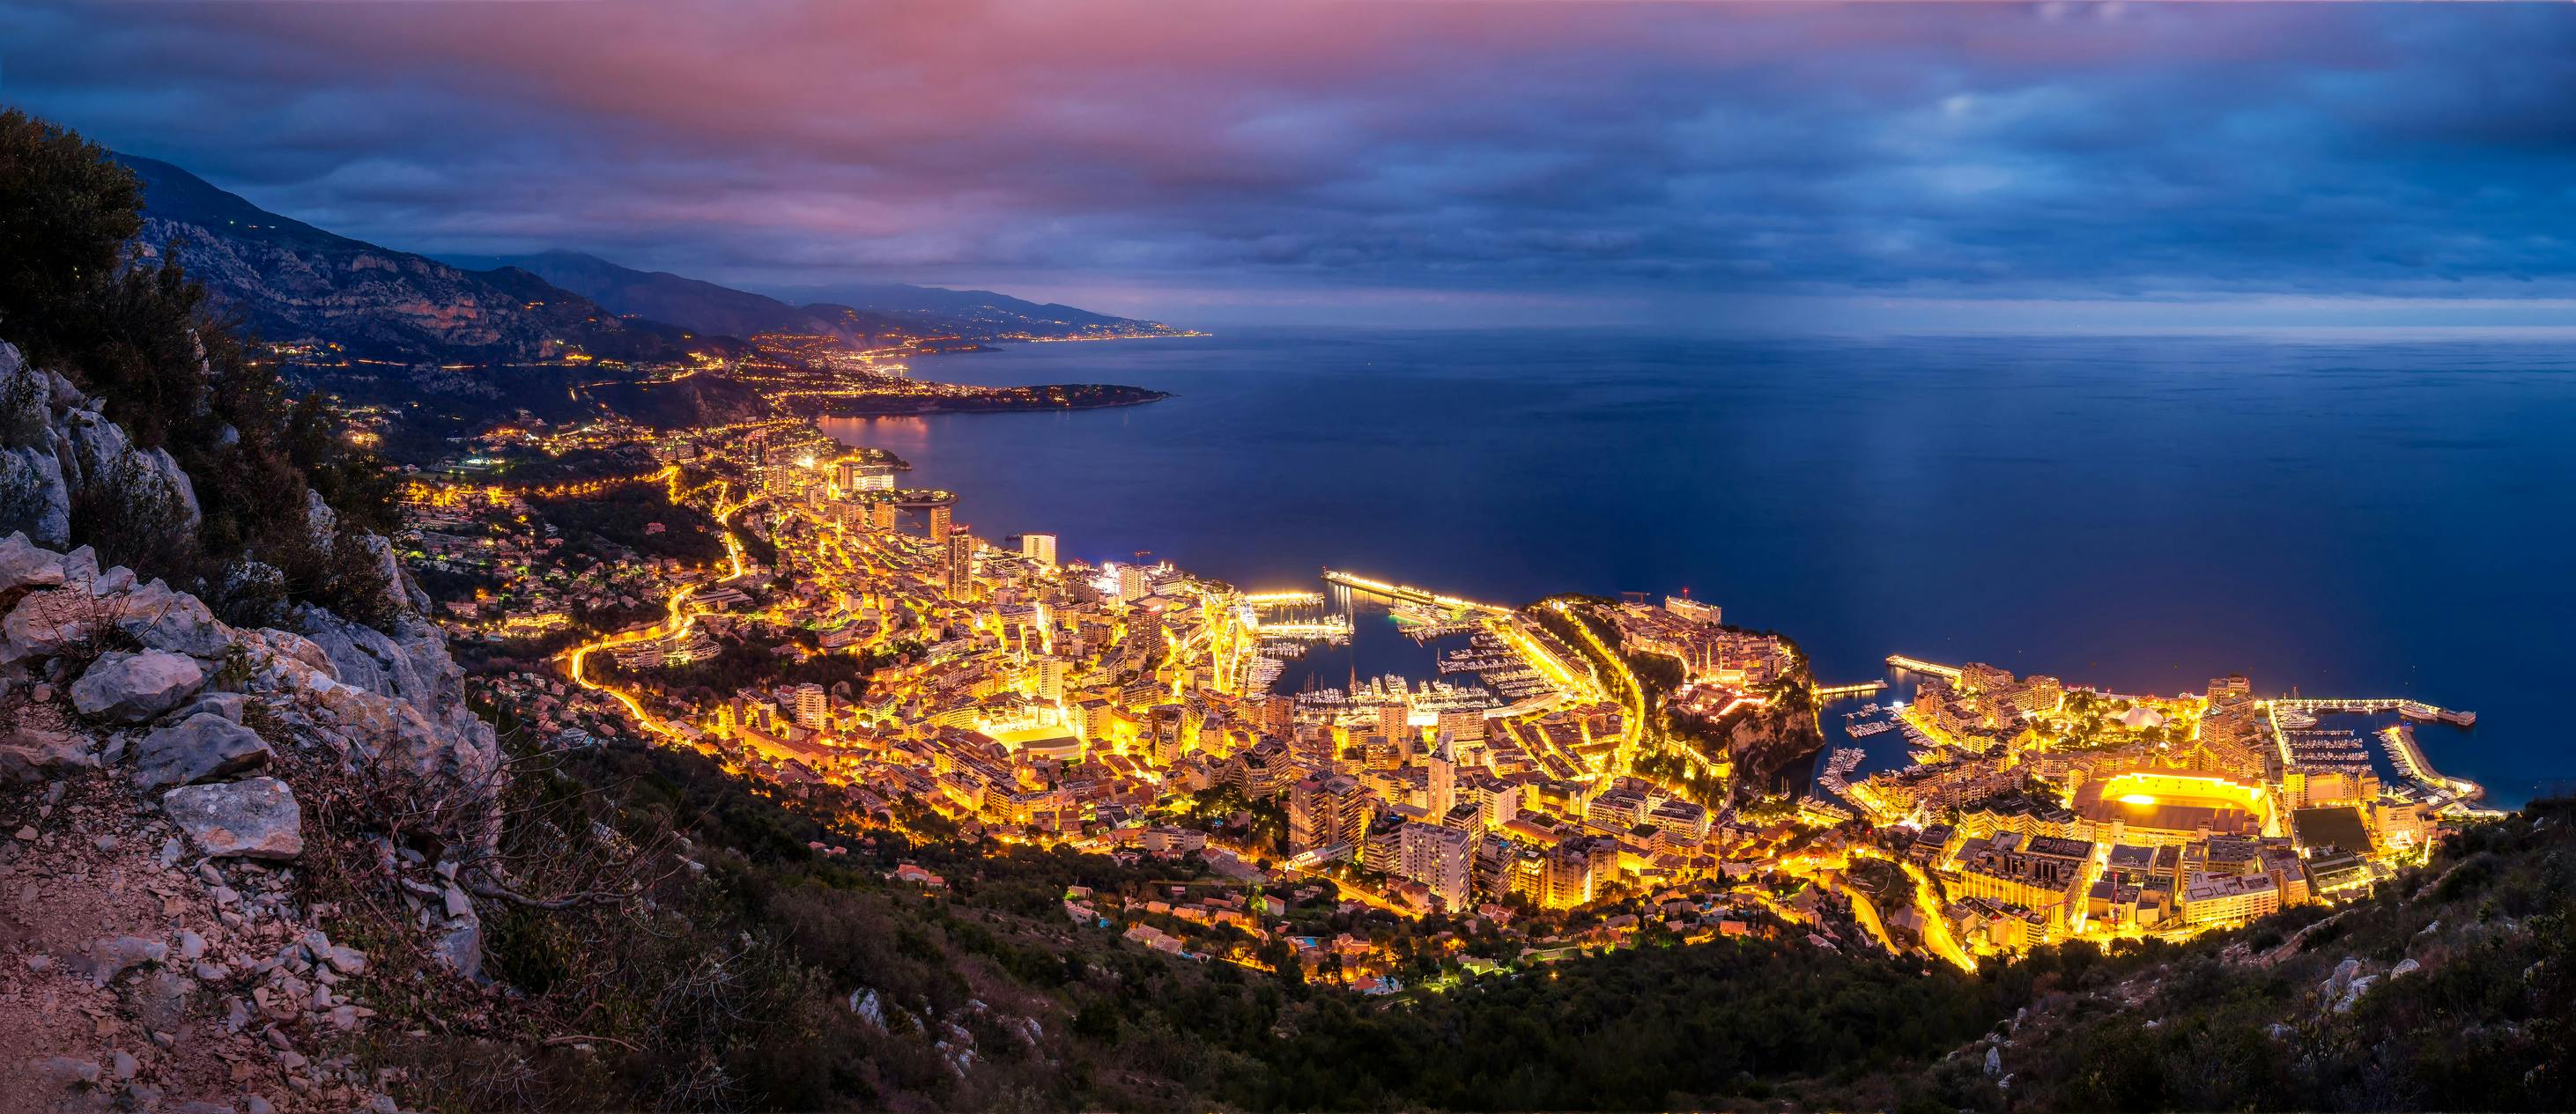 Private tour of Monaco and Monte Carlo by night Musement